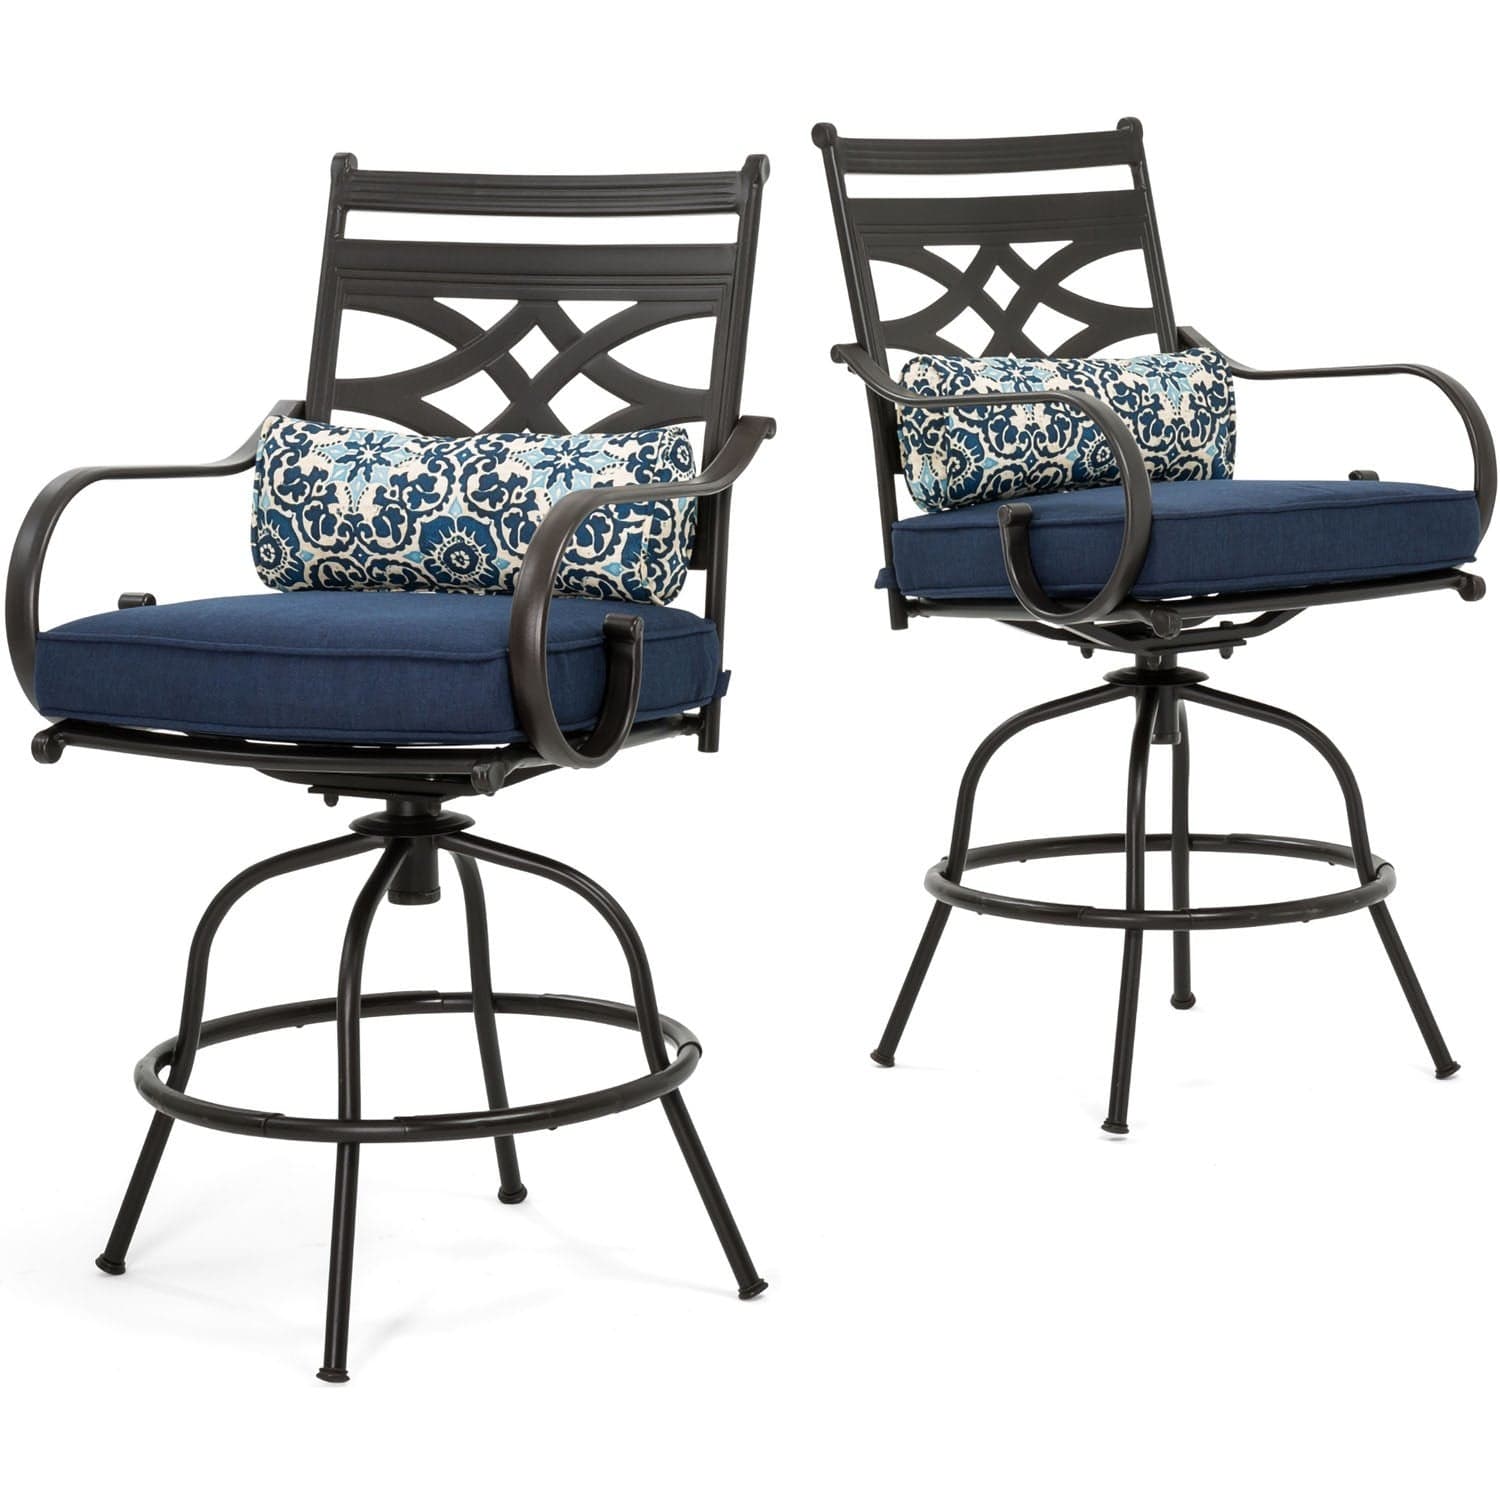 Hanover Outdoor Dining Set Hanover Montclair 3-Piece High-Dining Set in Navy Blue with 2 Swivel Chairs and a 33-Inch Square Table | MCLRDN3PCBRSW2-NVY